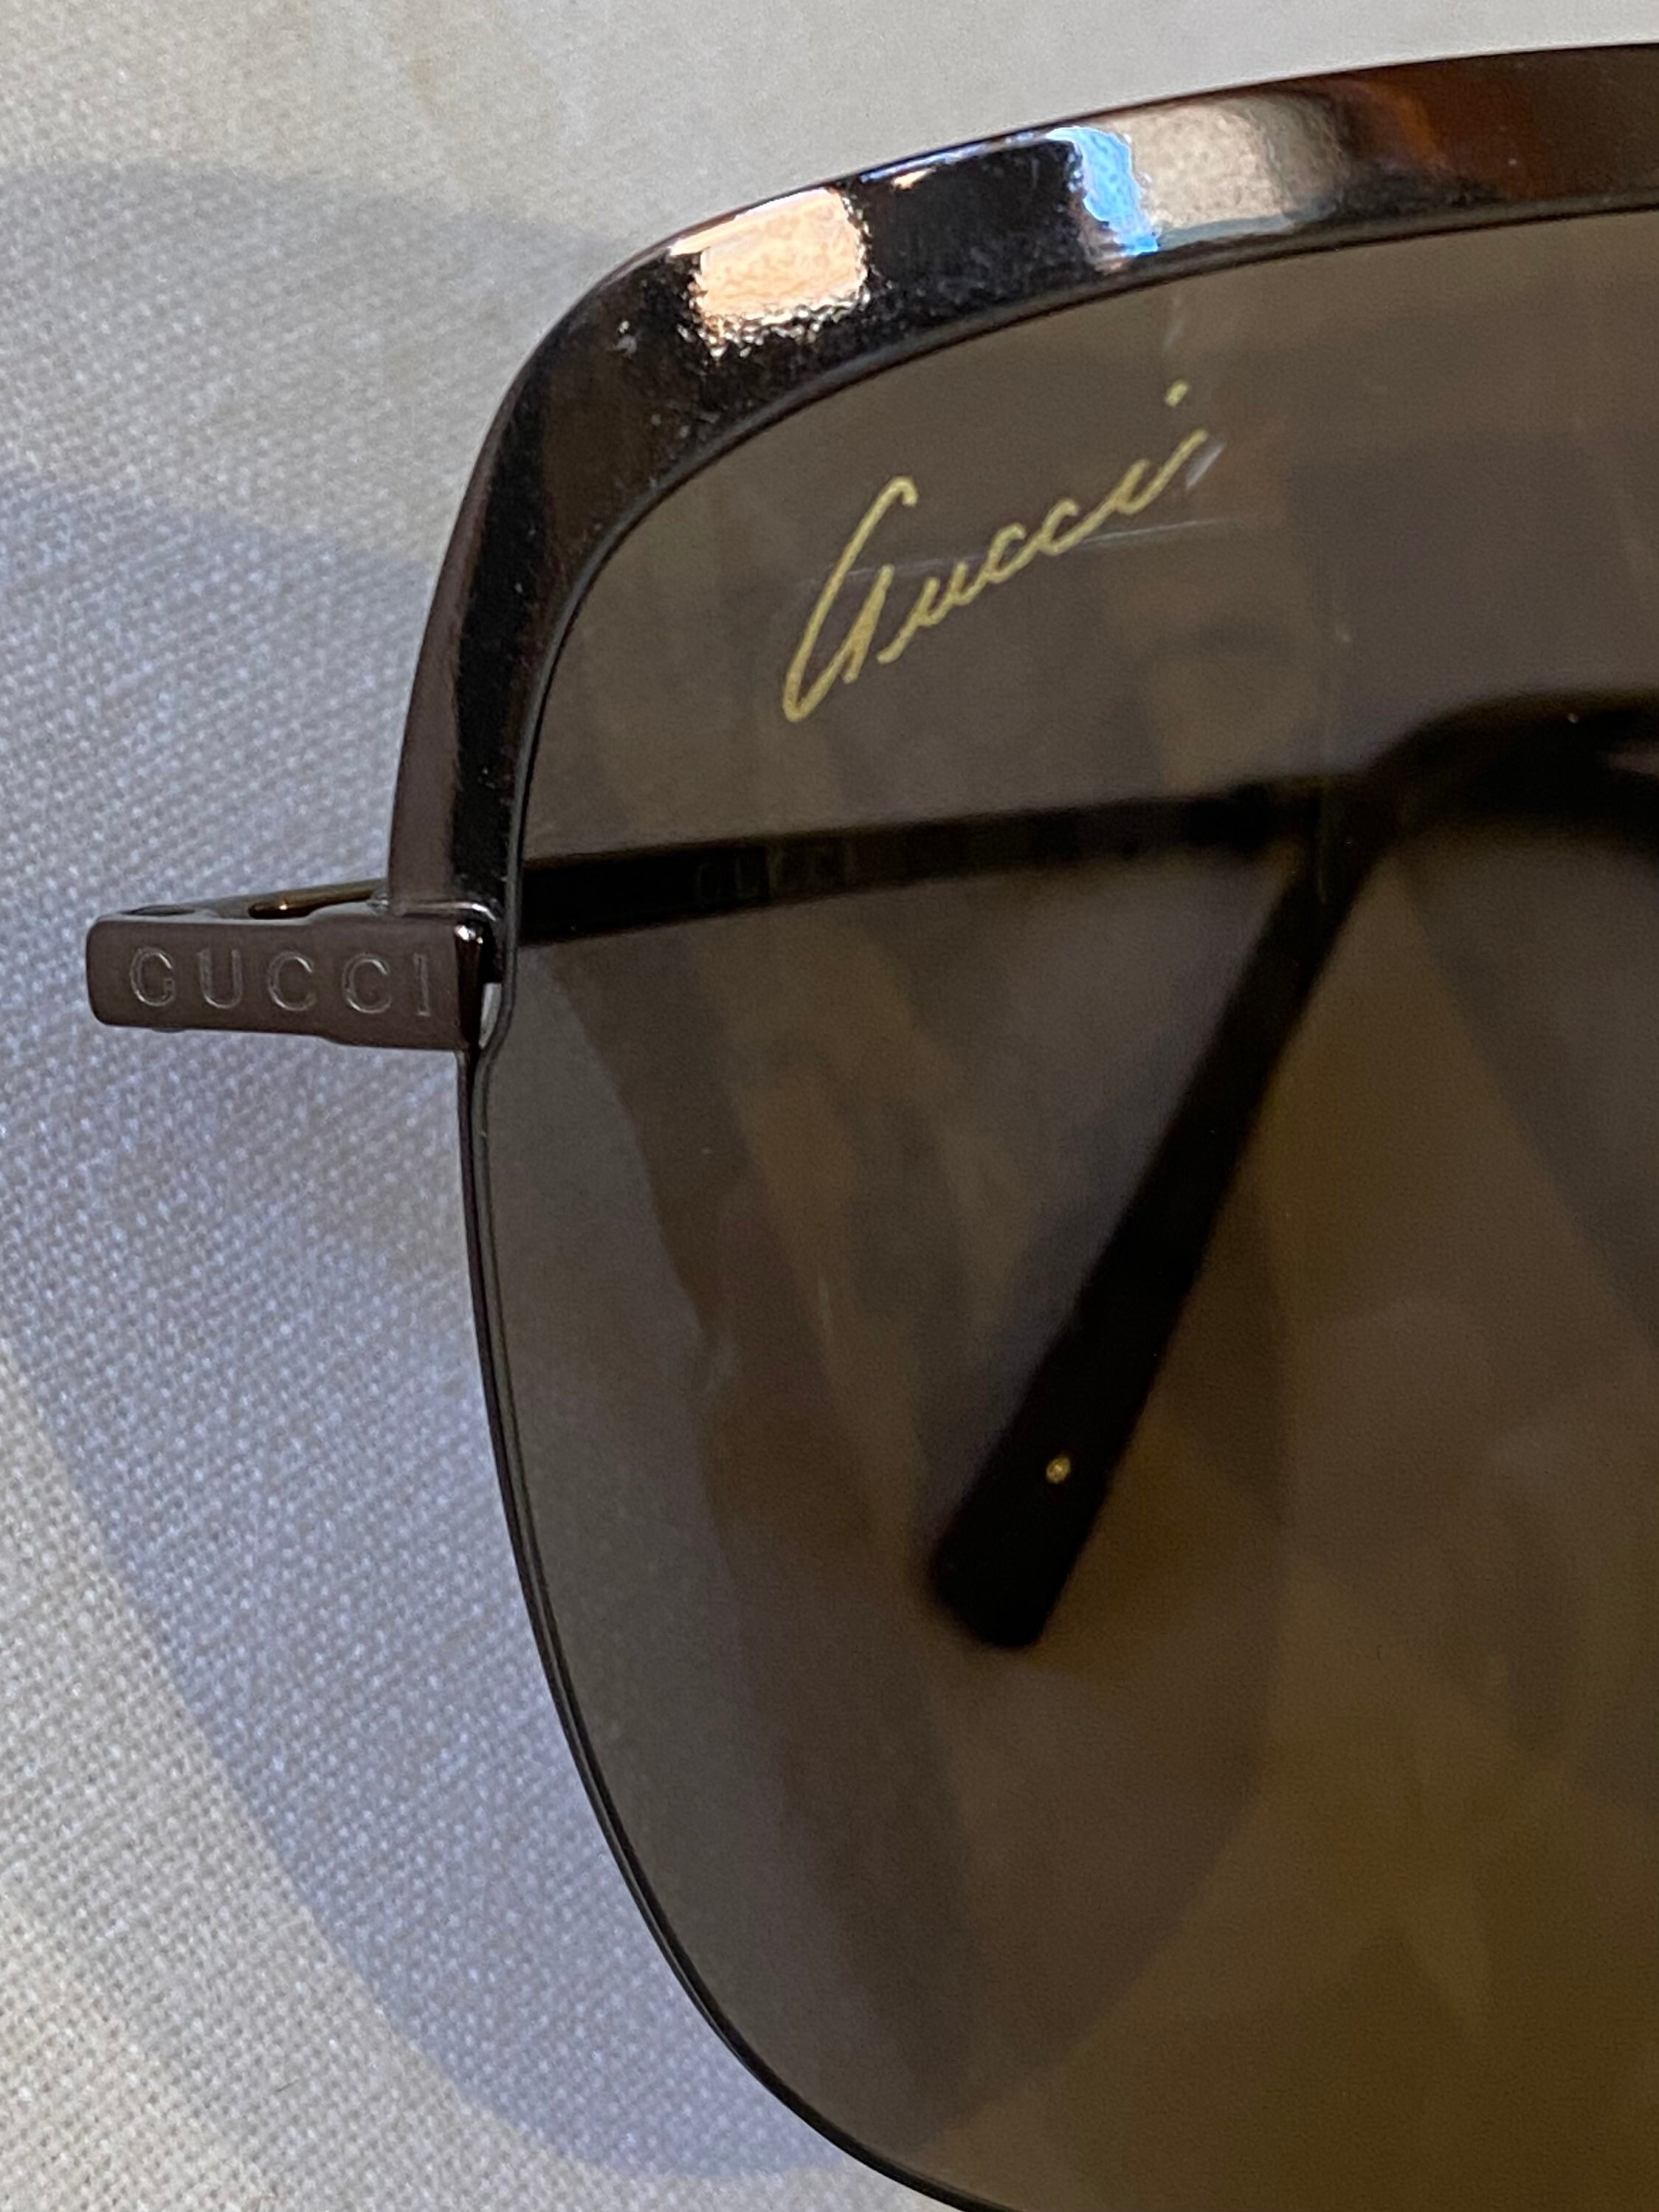 Gucci Sunglasses Black With Crystal – brandlover.net